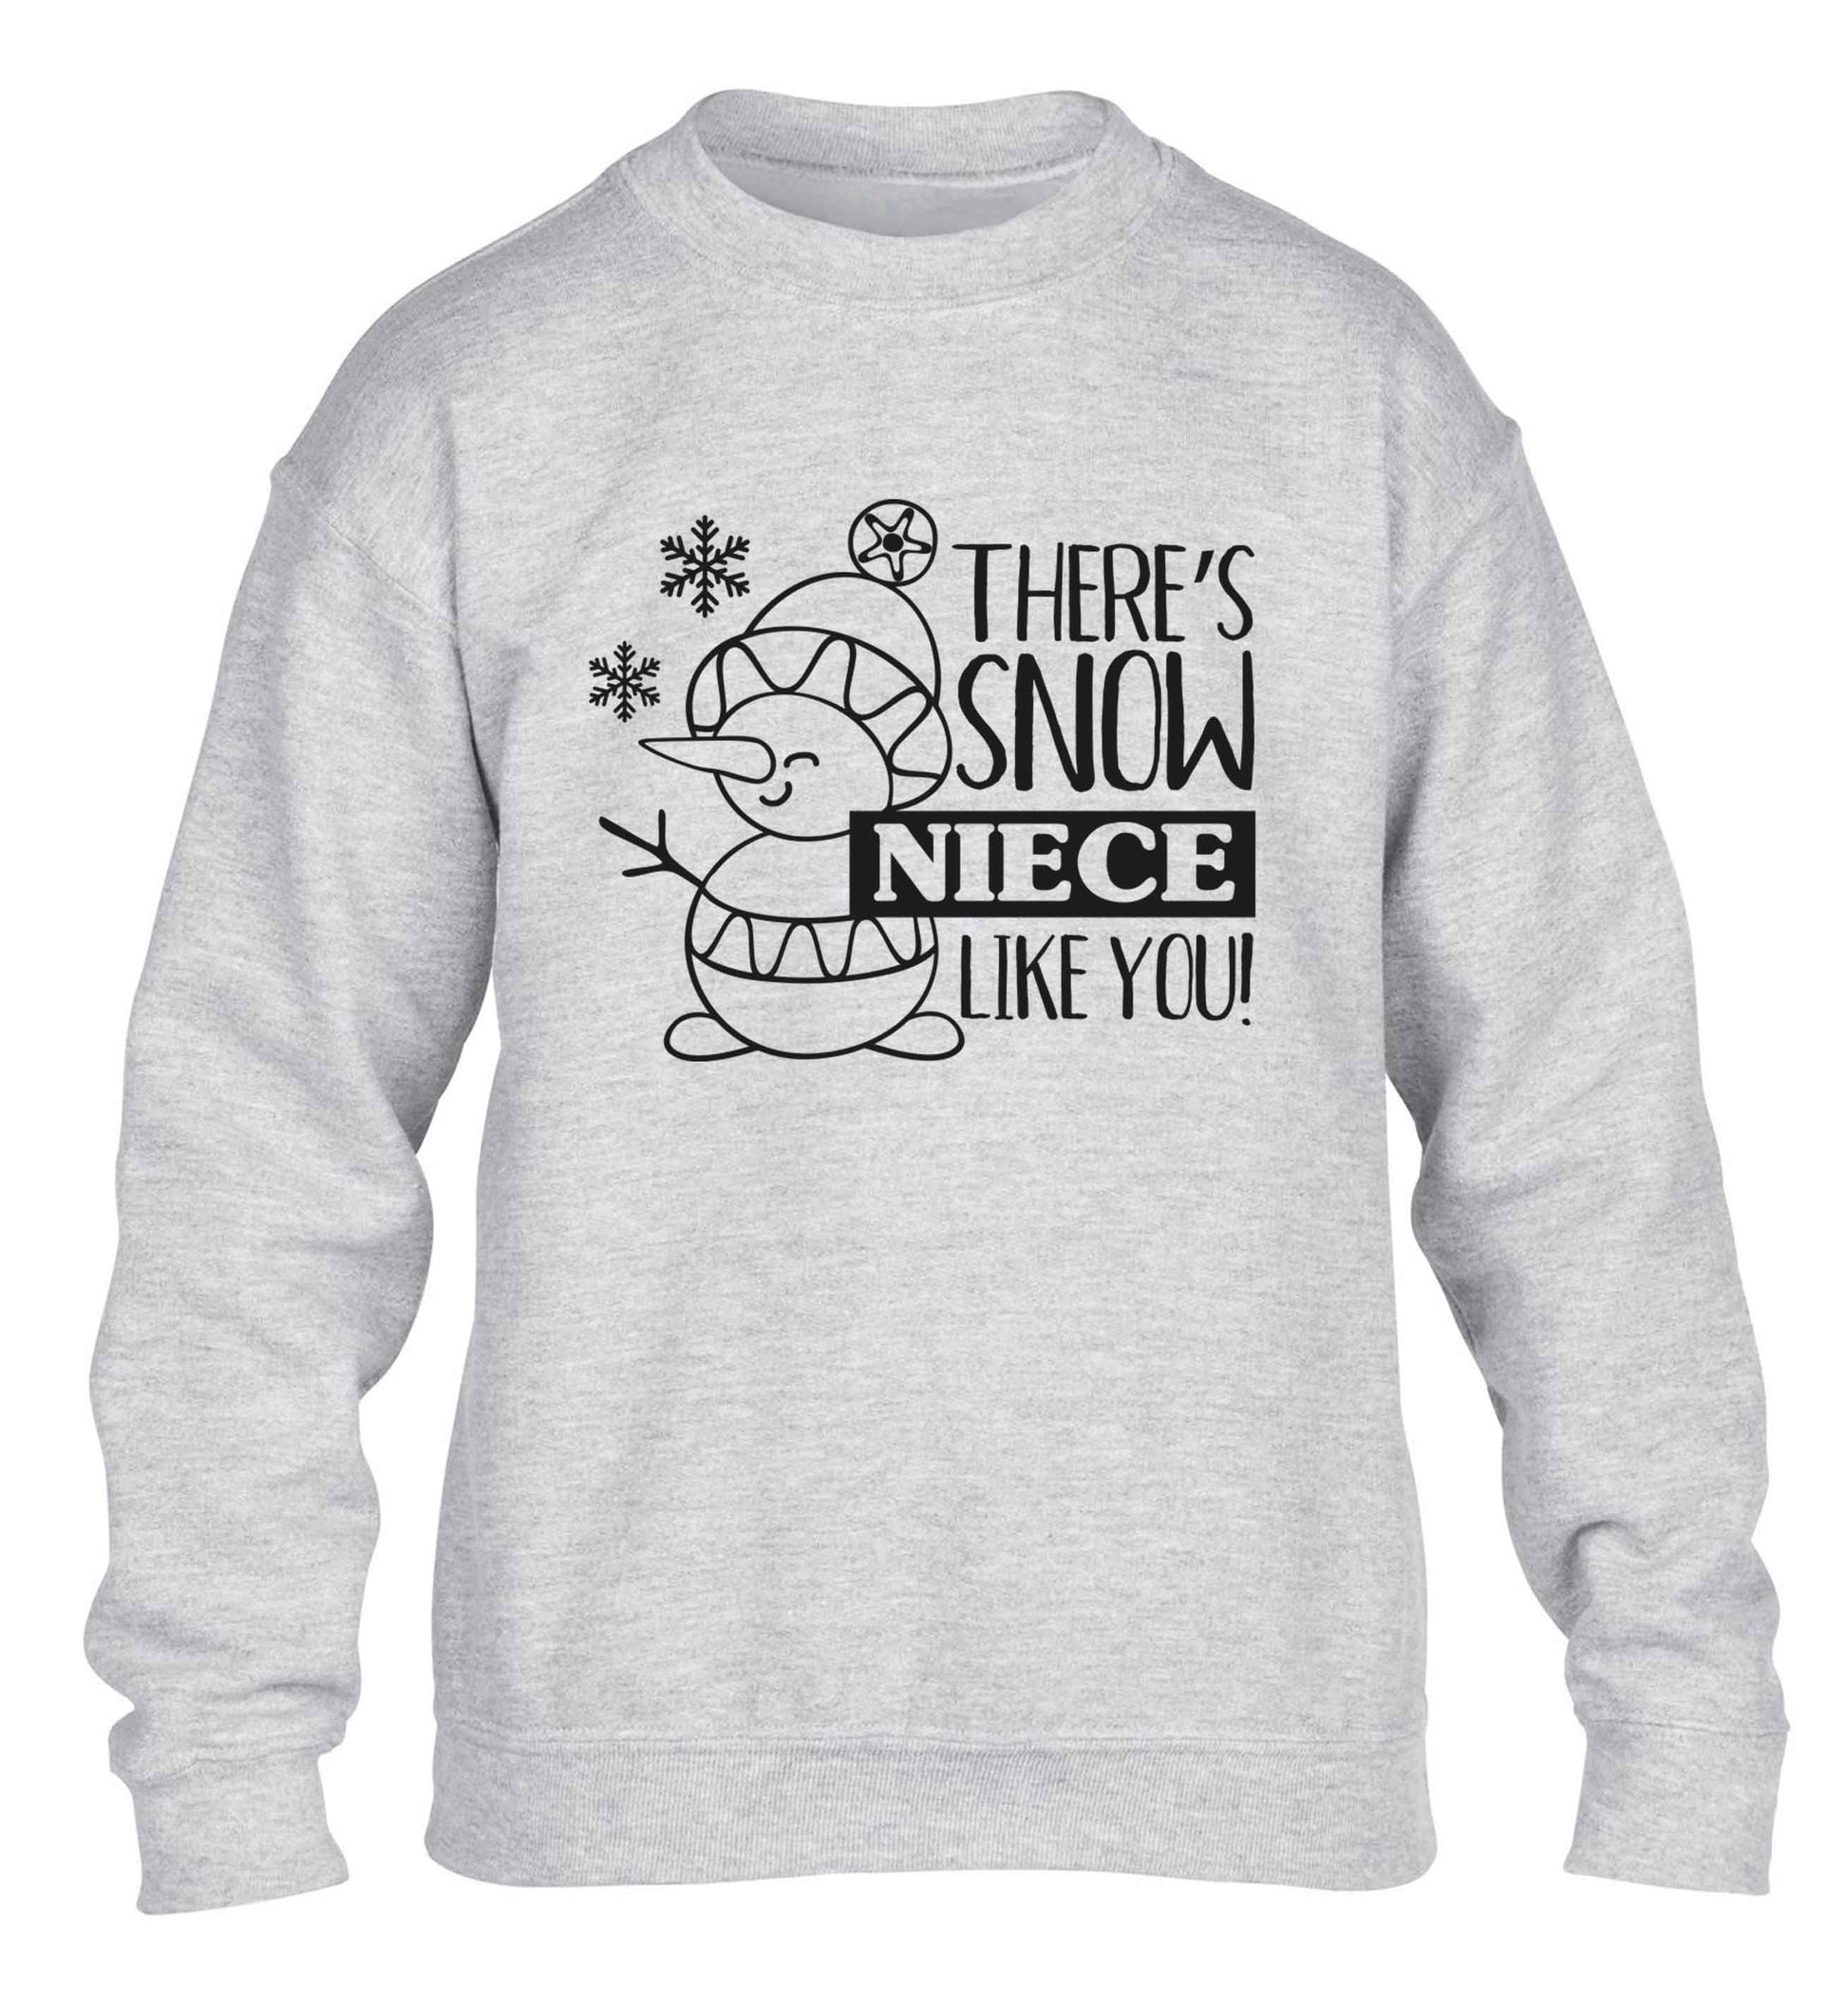 There's snow niece like you children's grey sweater 12-13 Years